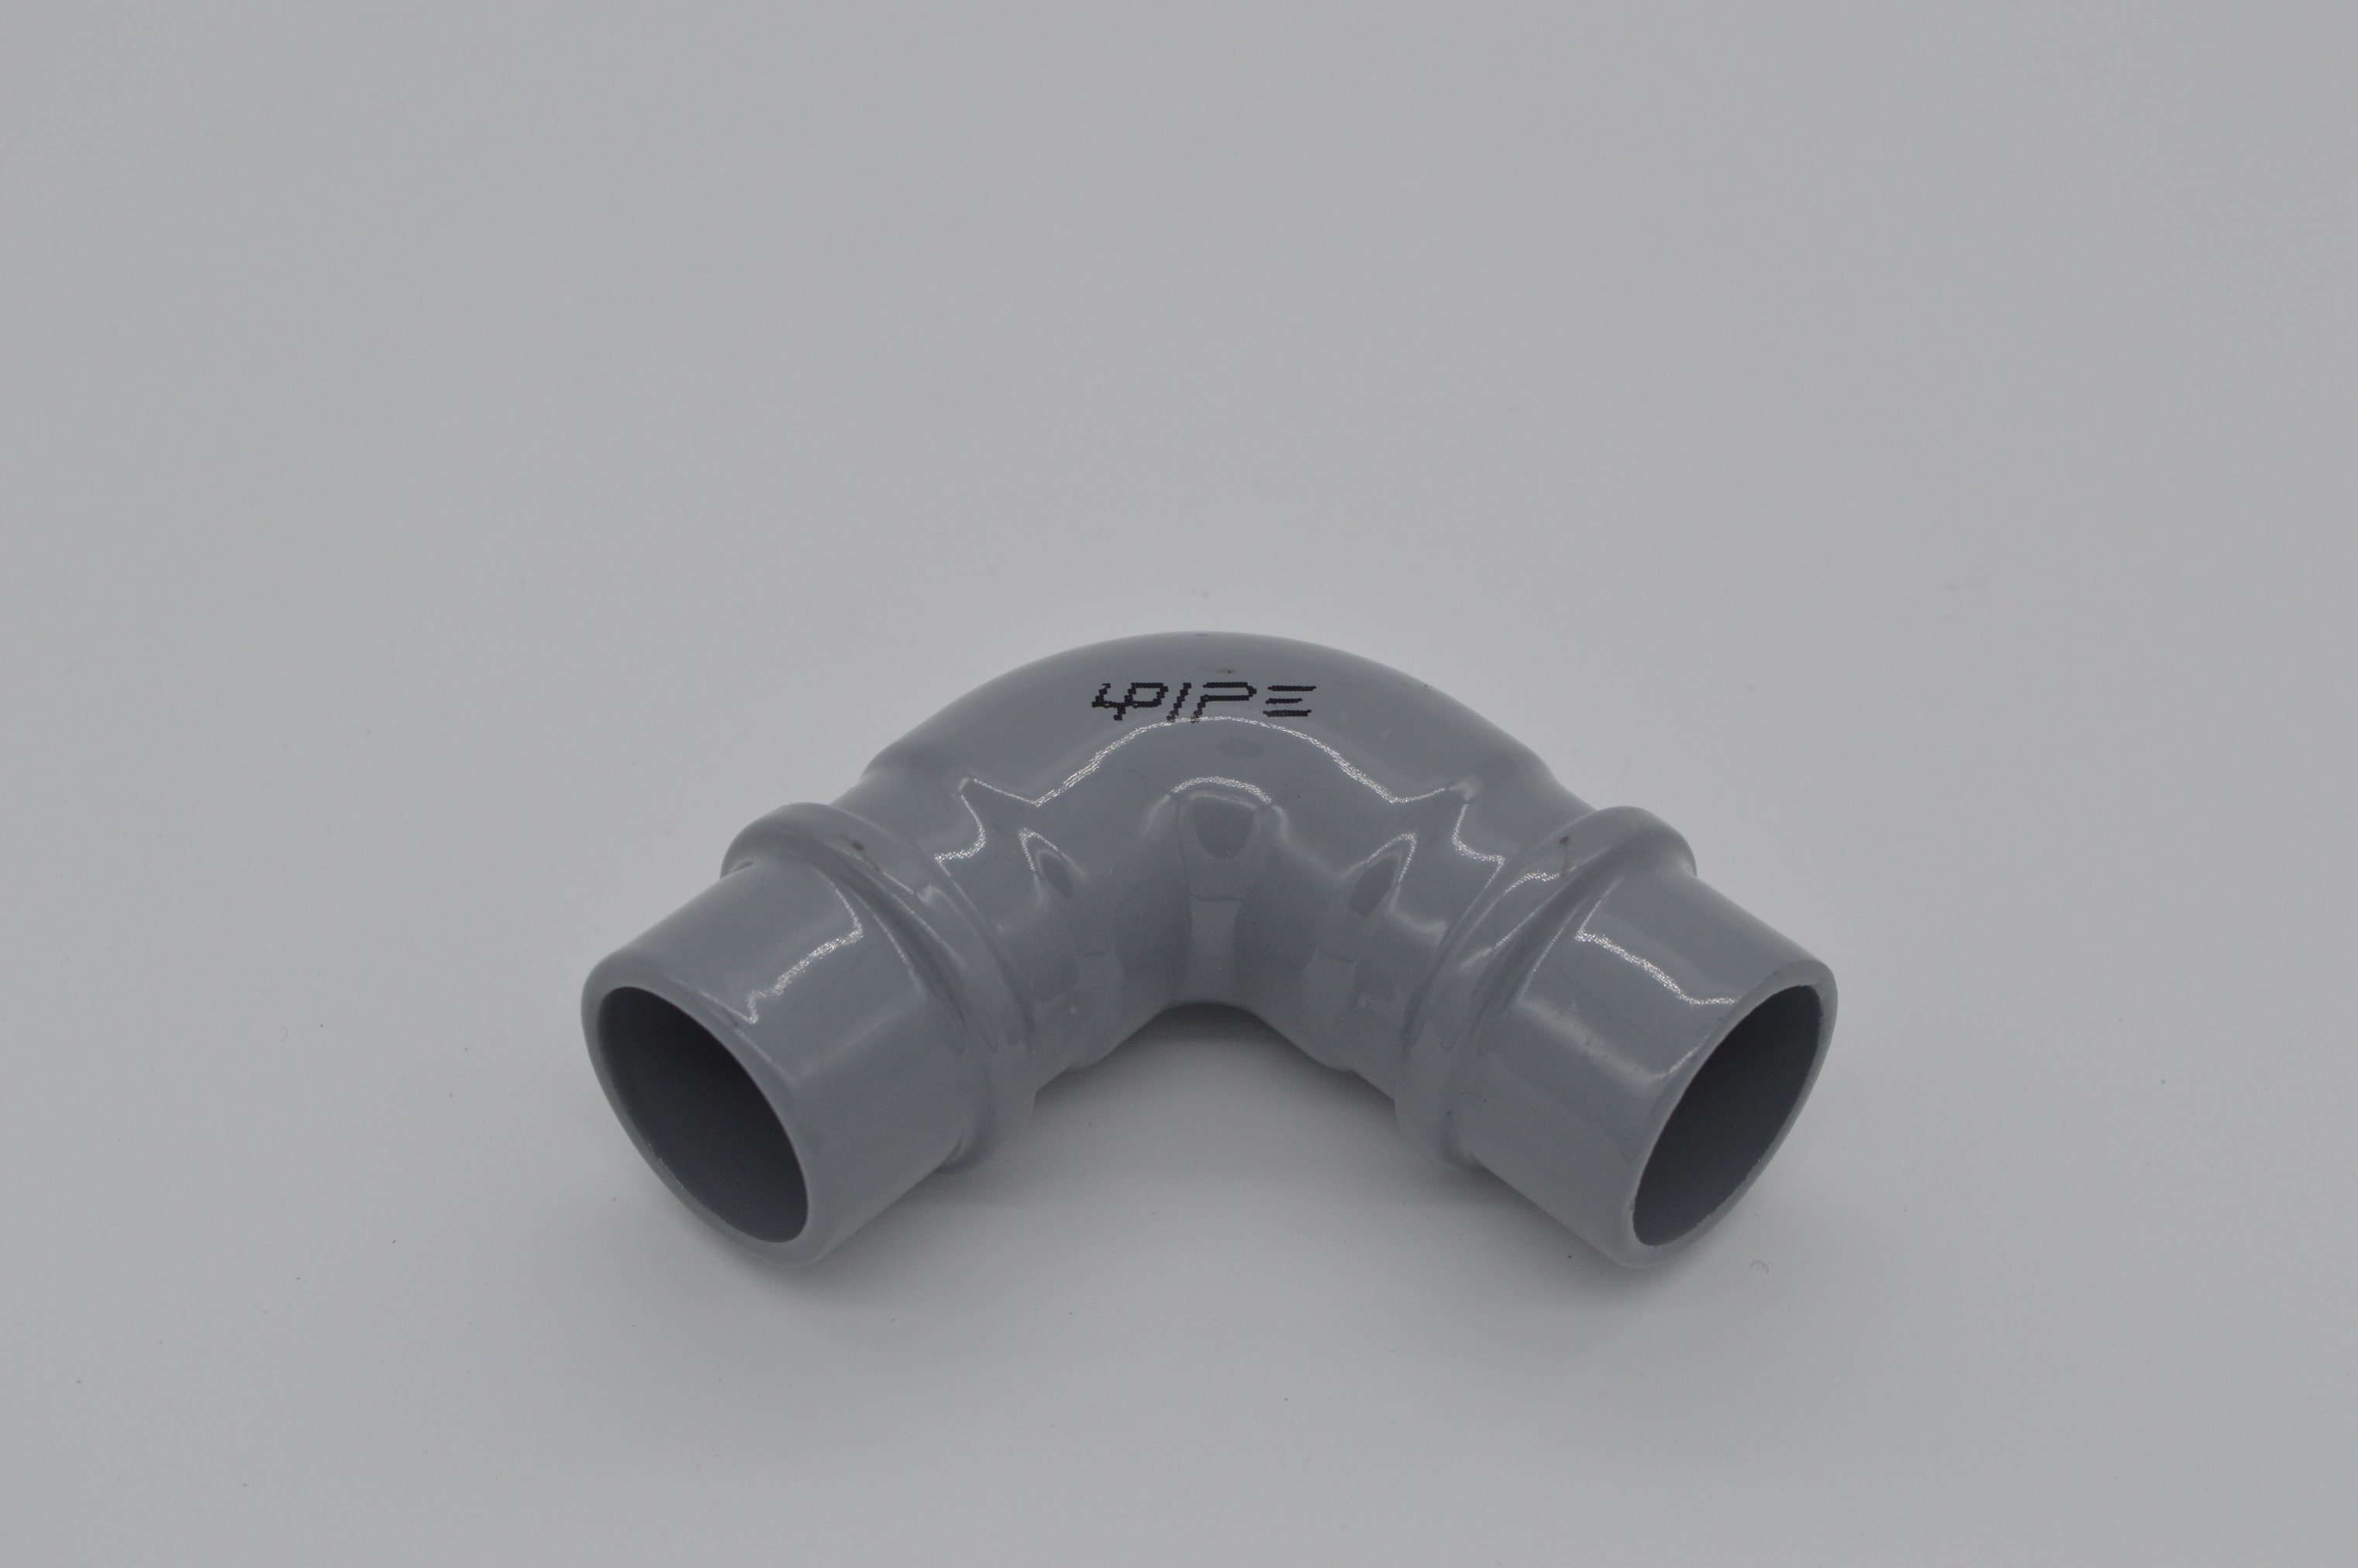 90 Degree Elbow Connector Pipe Fitting for Compressed Air/Vacuum/Gas Pipeline